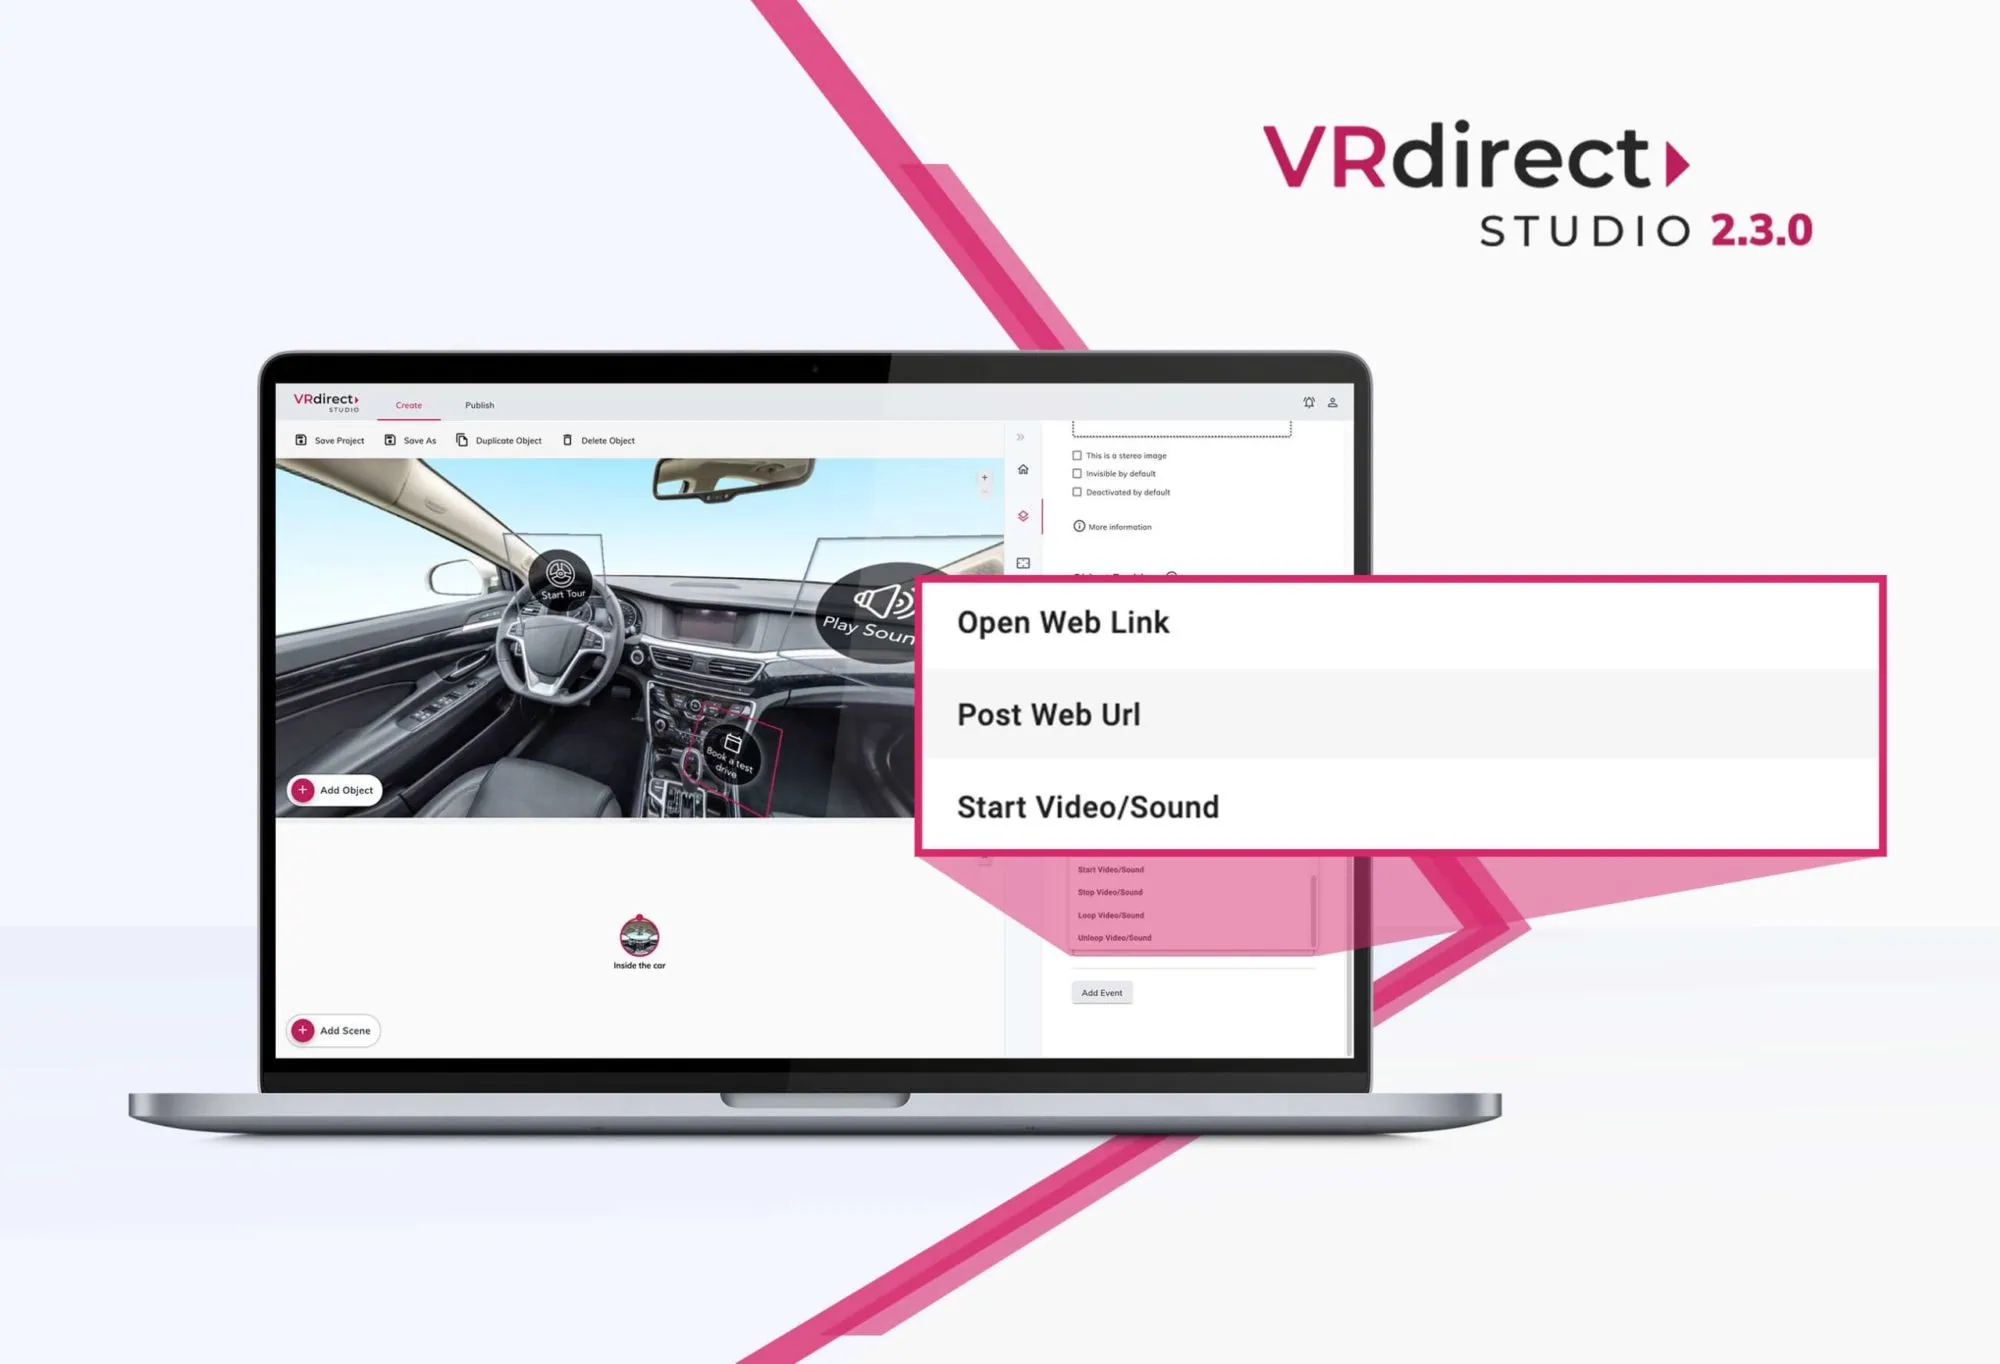 VRdirect 2.3.0 : New version enables widespread use of virtual reality in companies